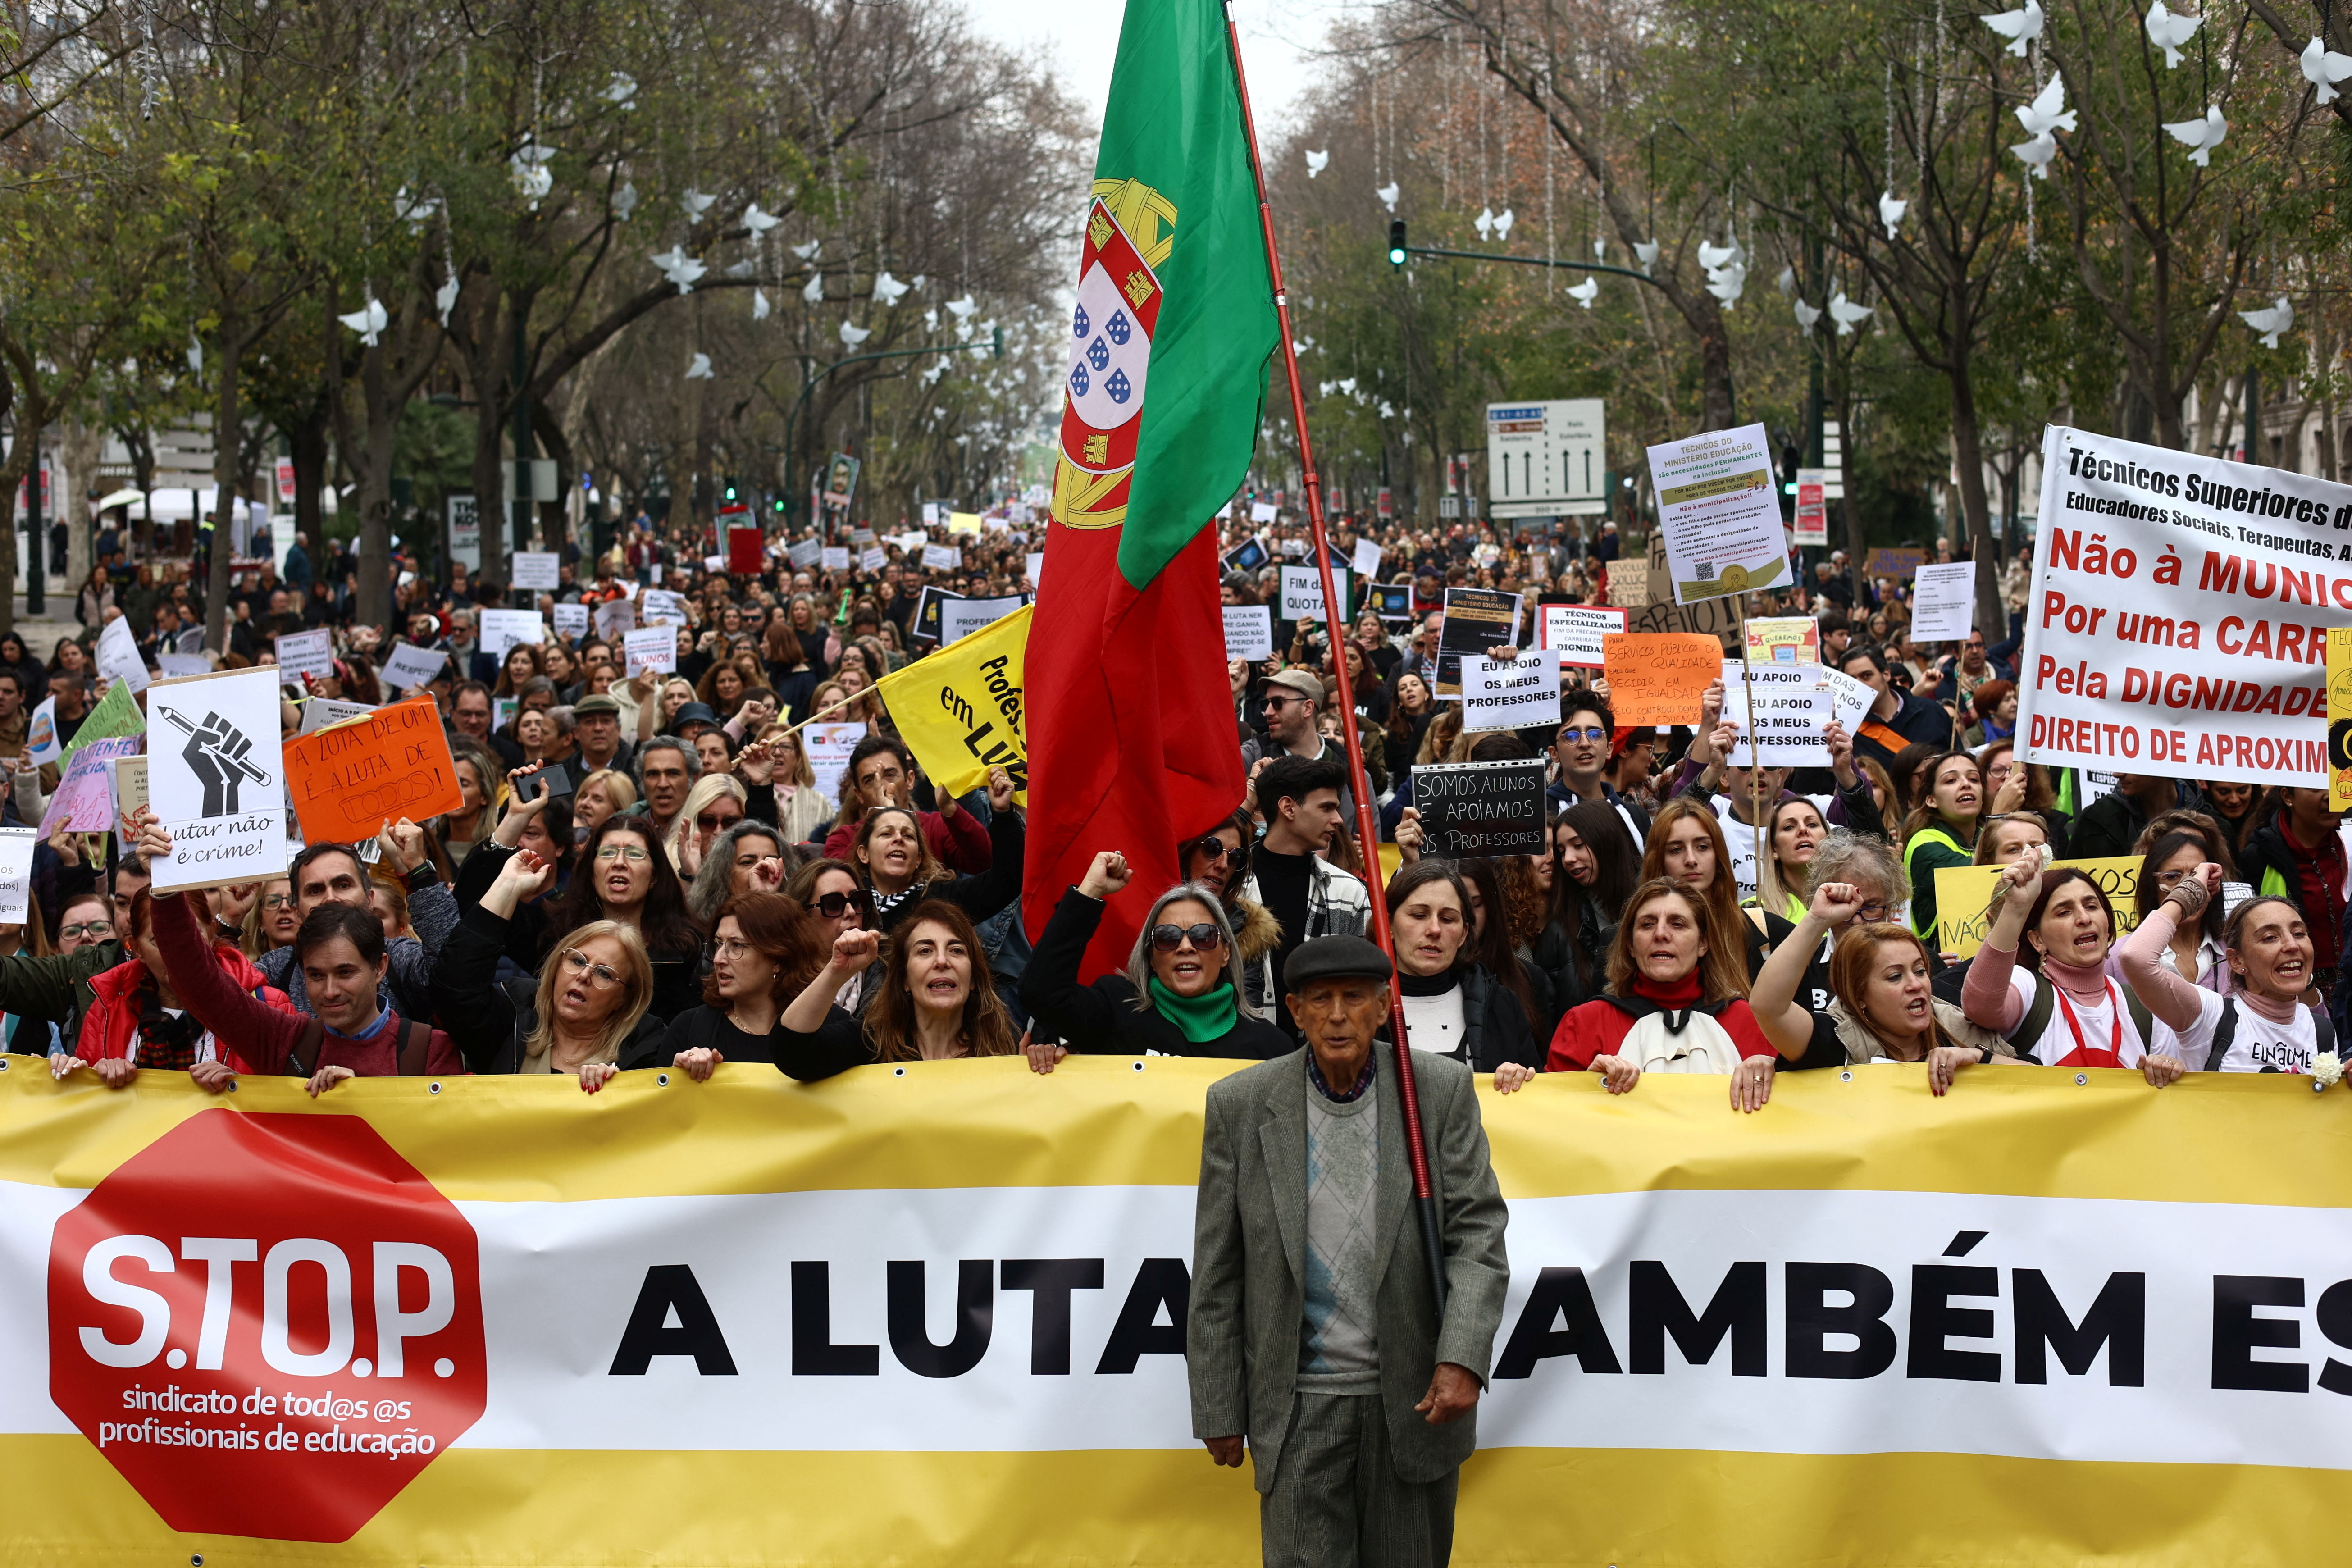 Public school workers demonstrate for better salaries and working conditions in Lisbon